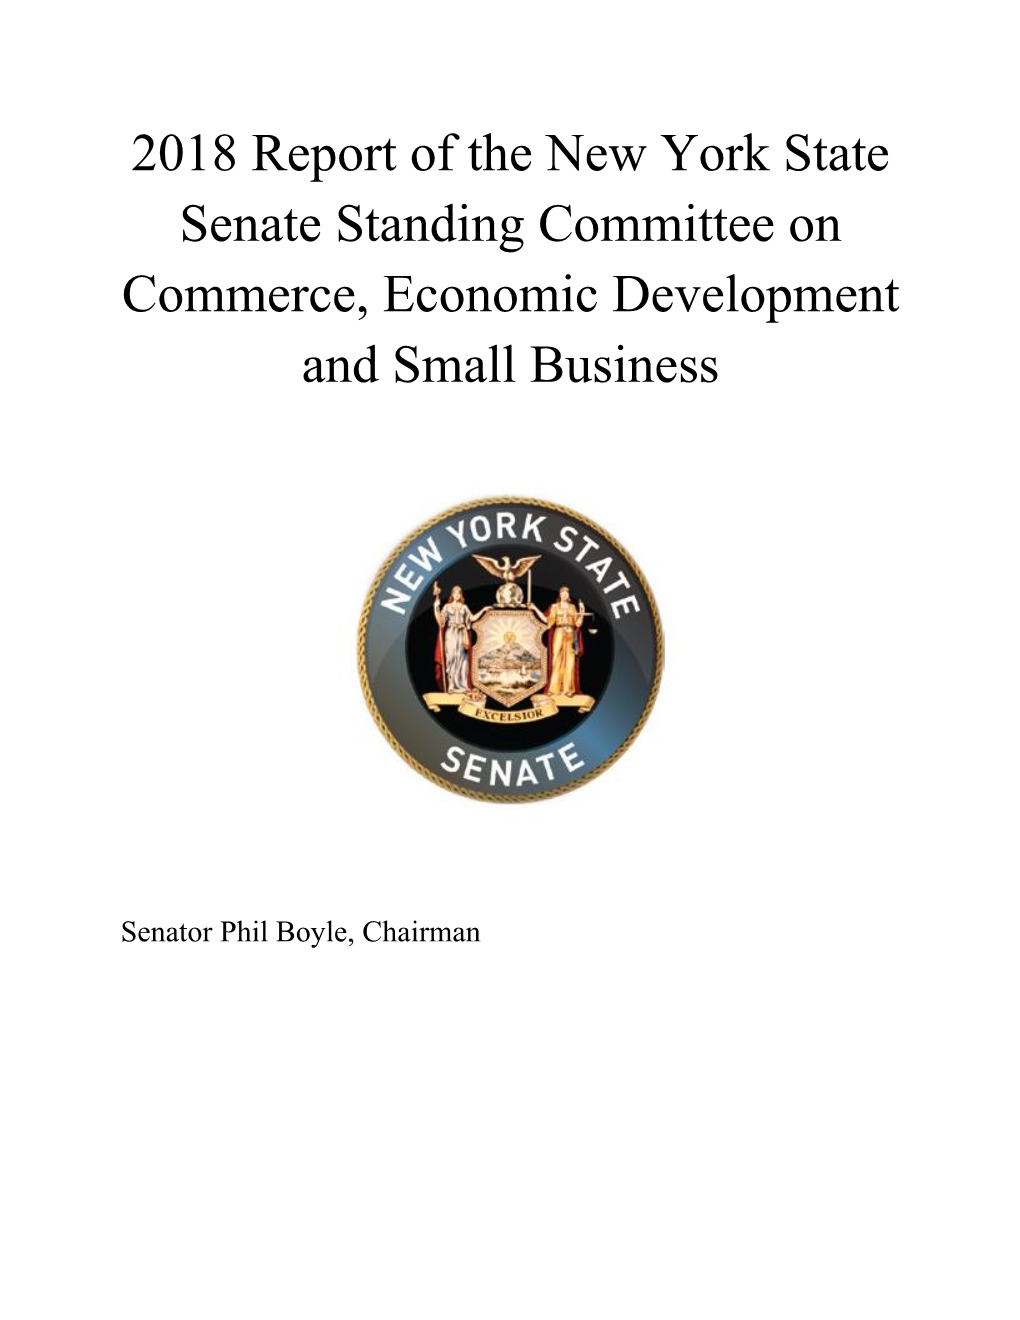 2018 Report of the New York State Senate Standing Committee on Commerce, Economic Development and Small Business